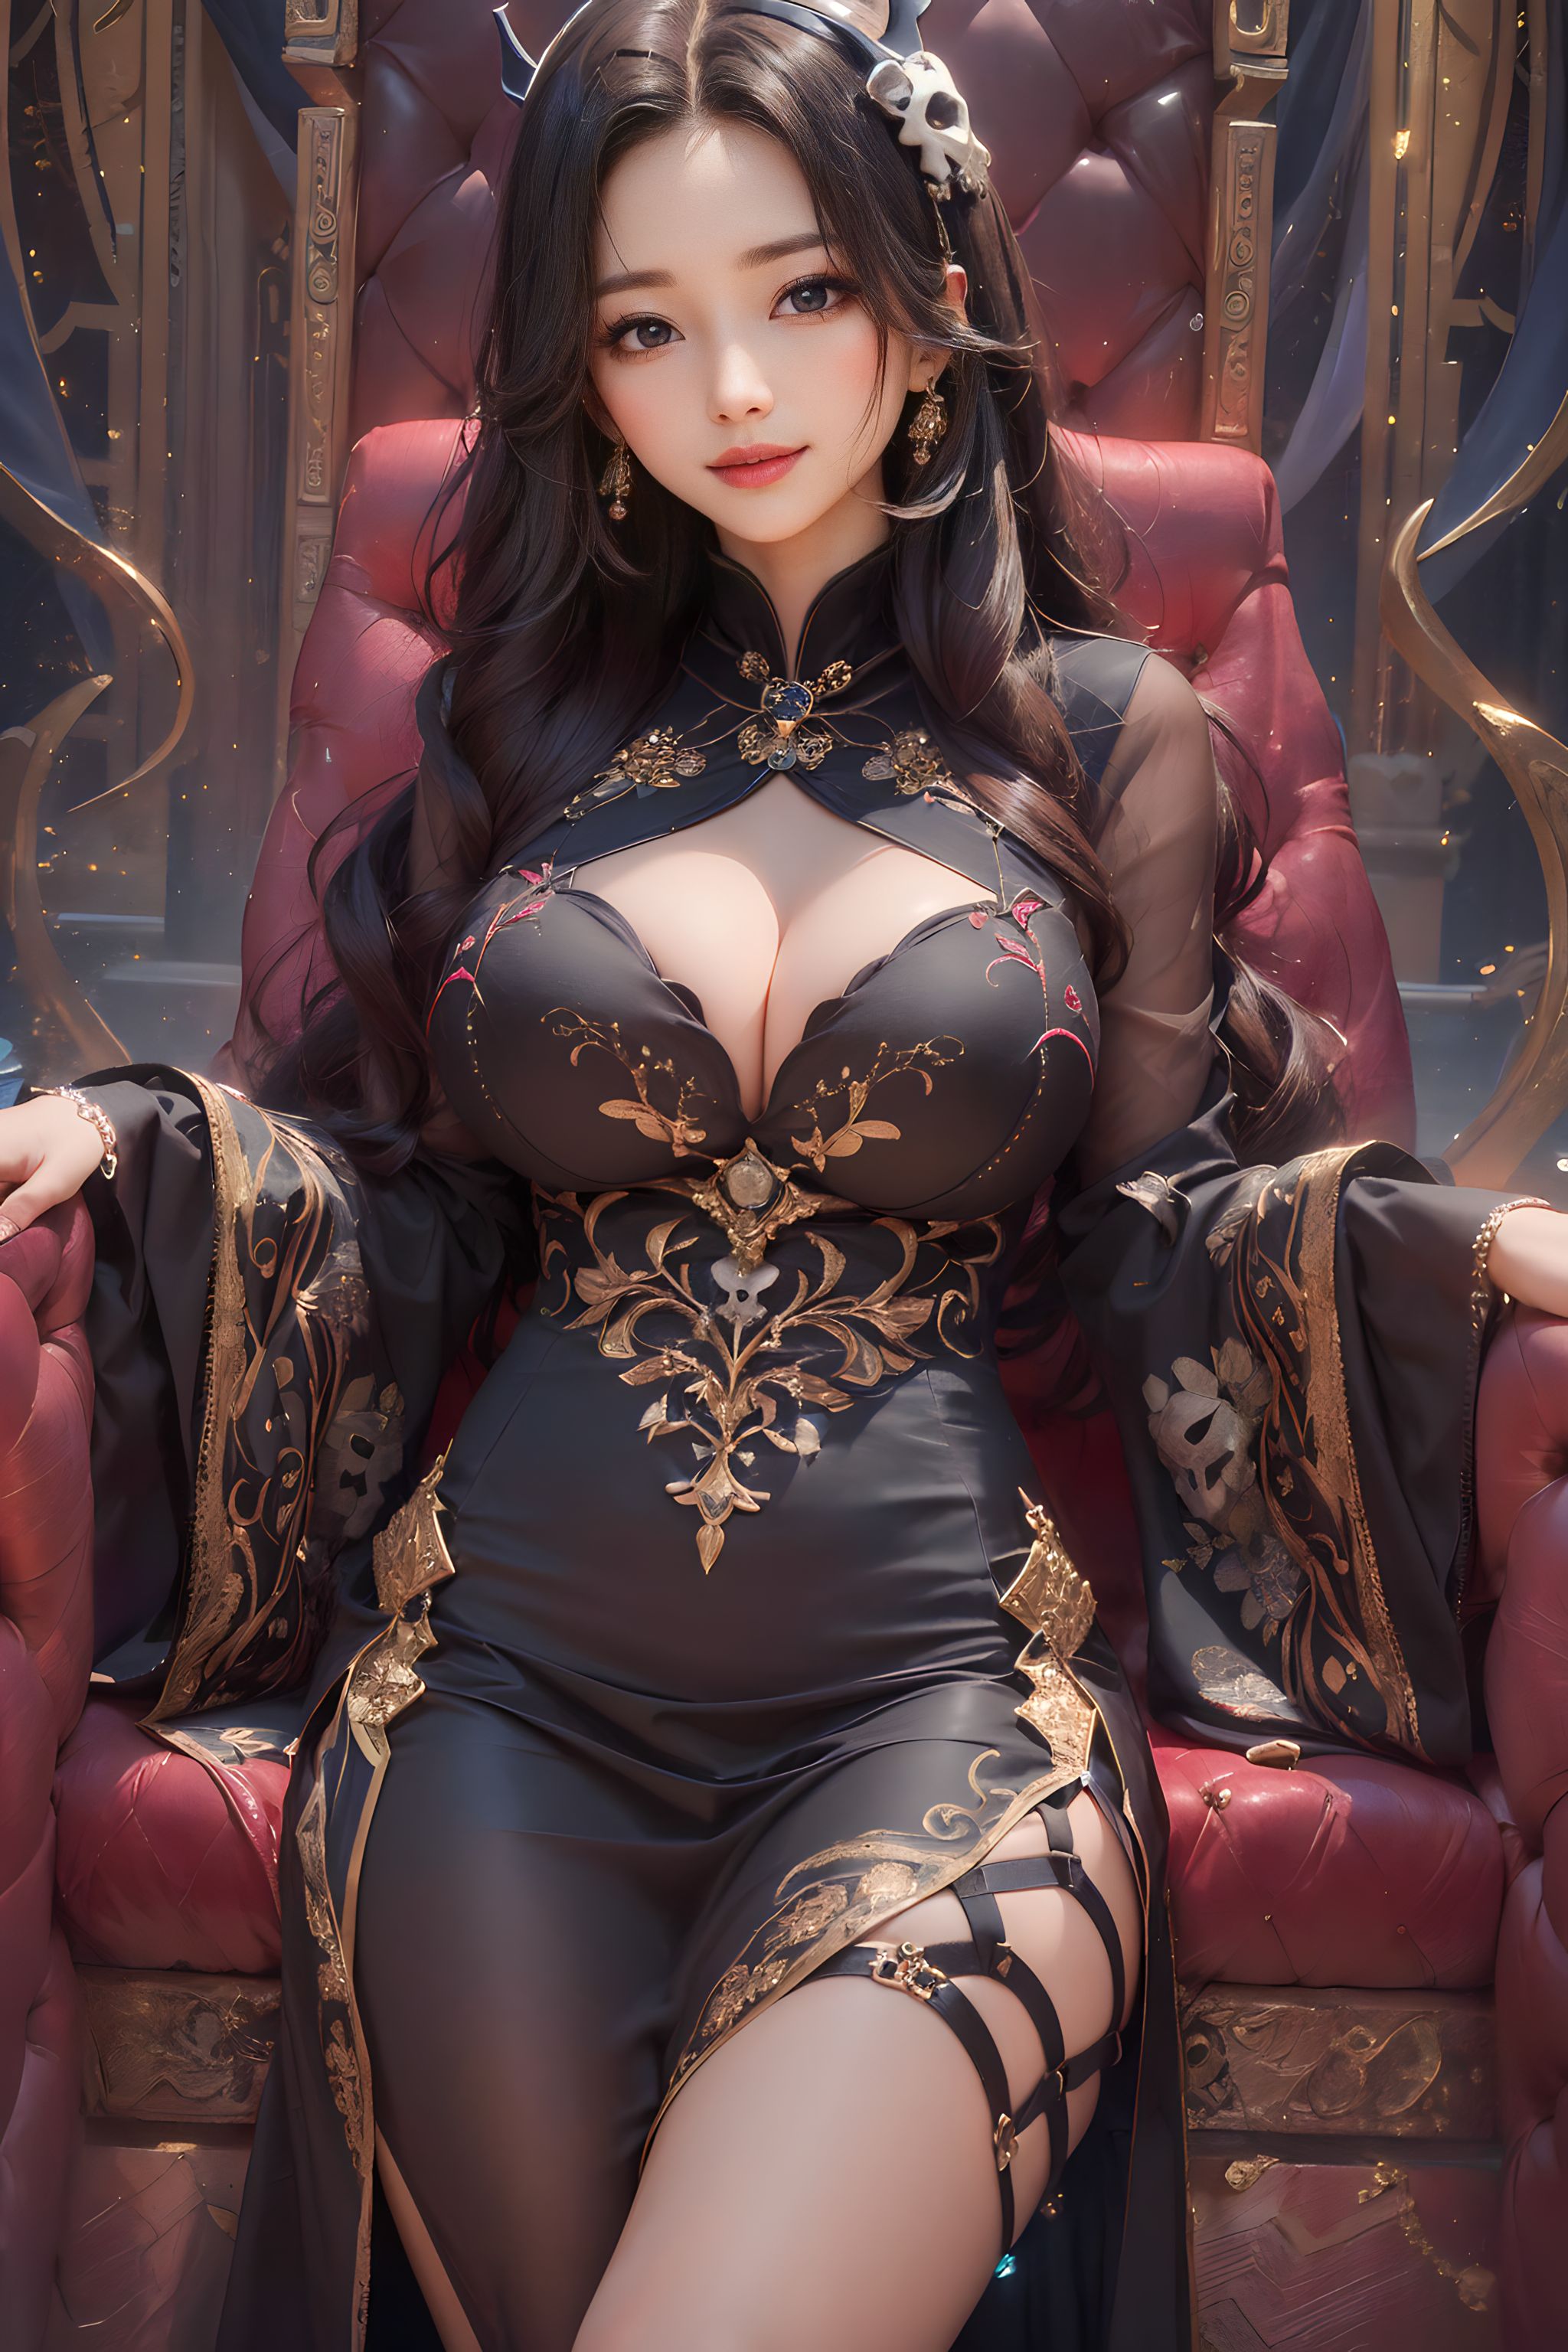 General 2048x3072 AIbot dress AI art looking at viewer Asian women portrait display earring cleavage big boobs throne